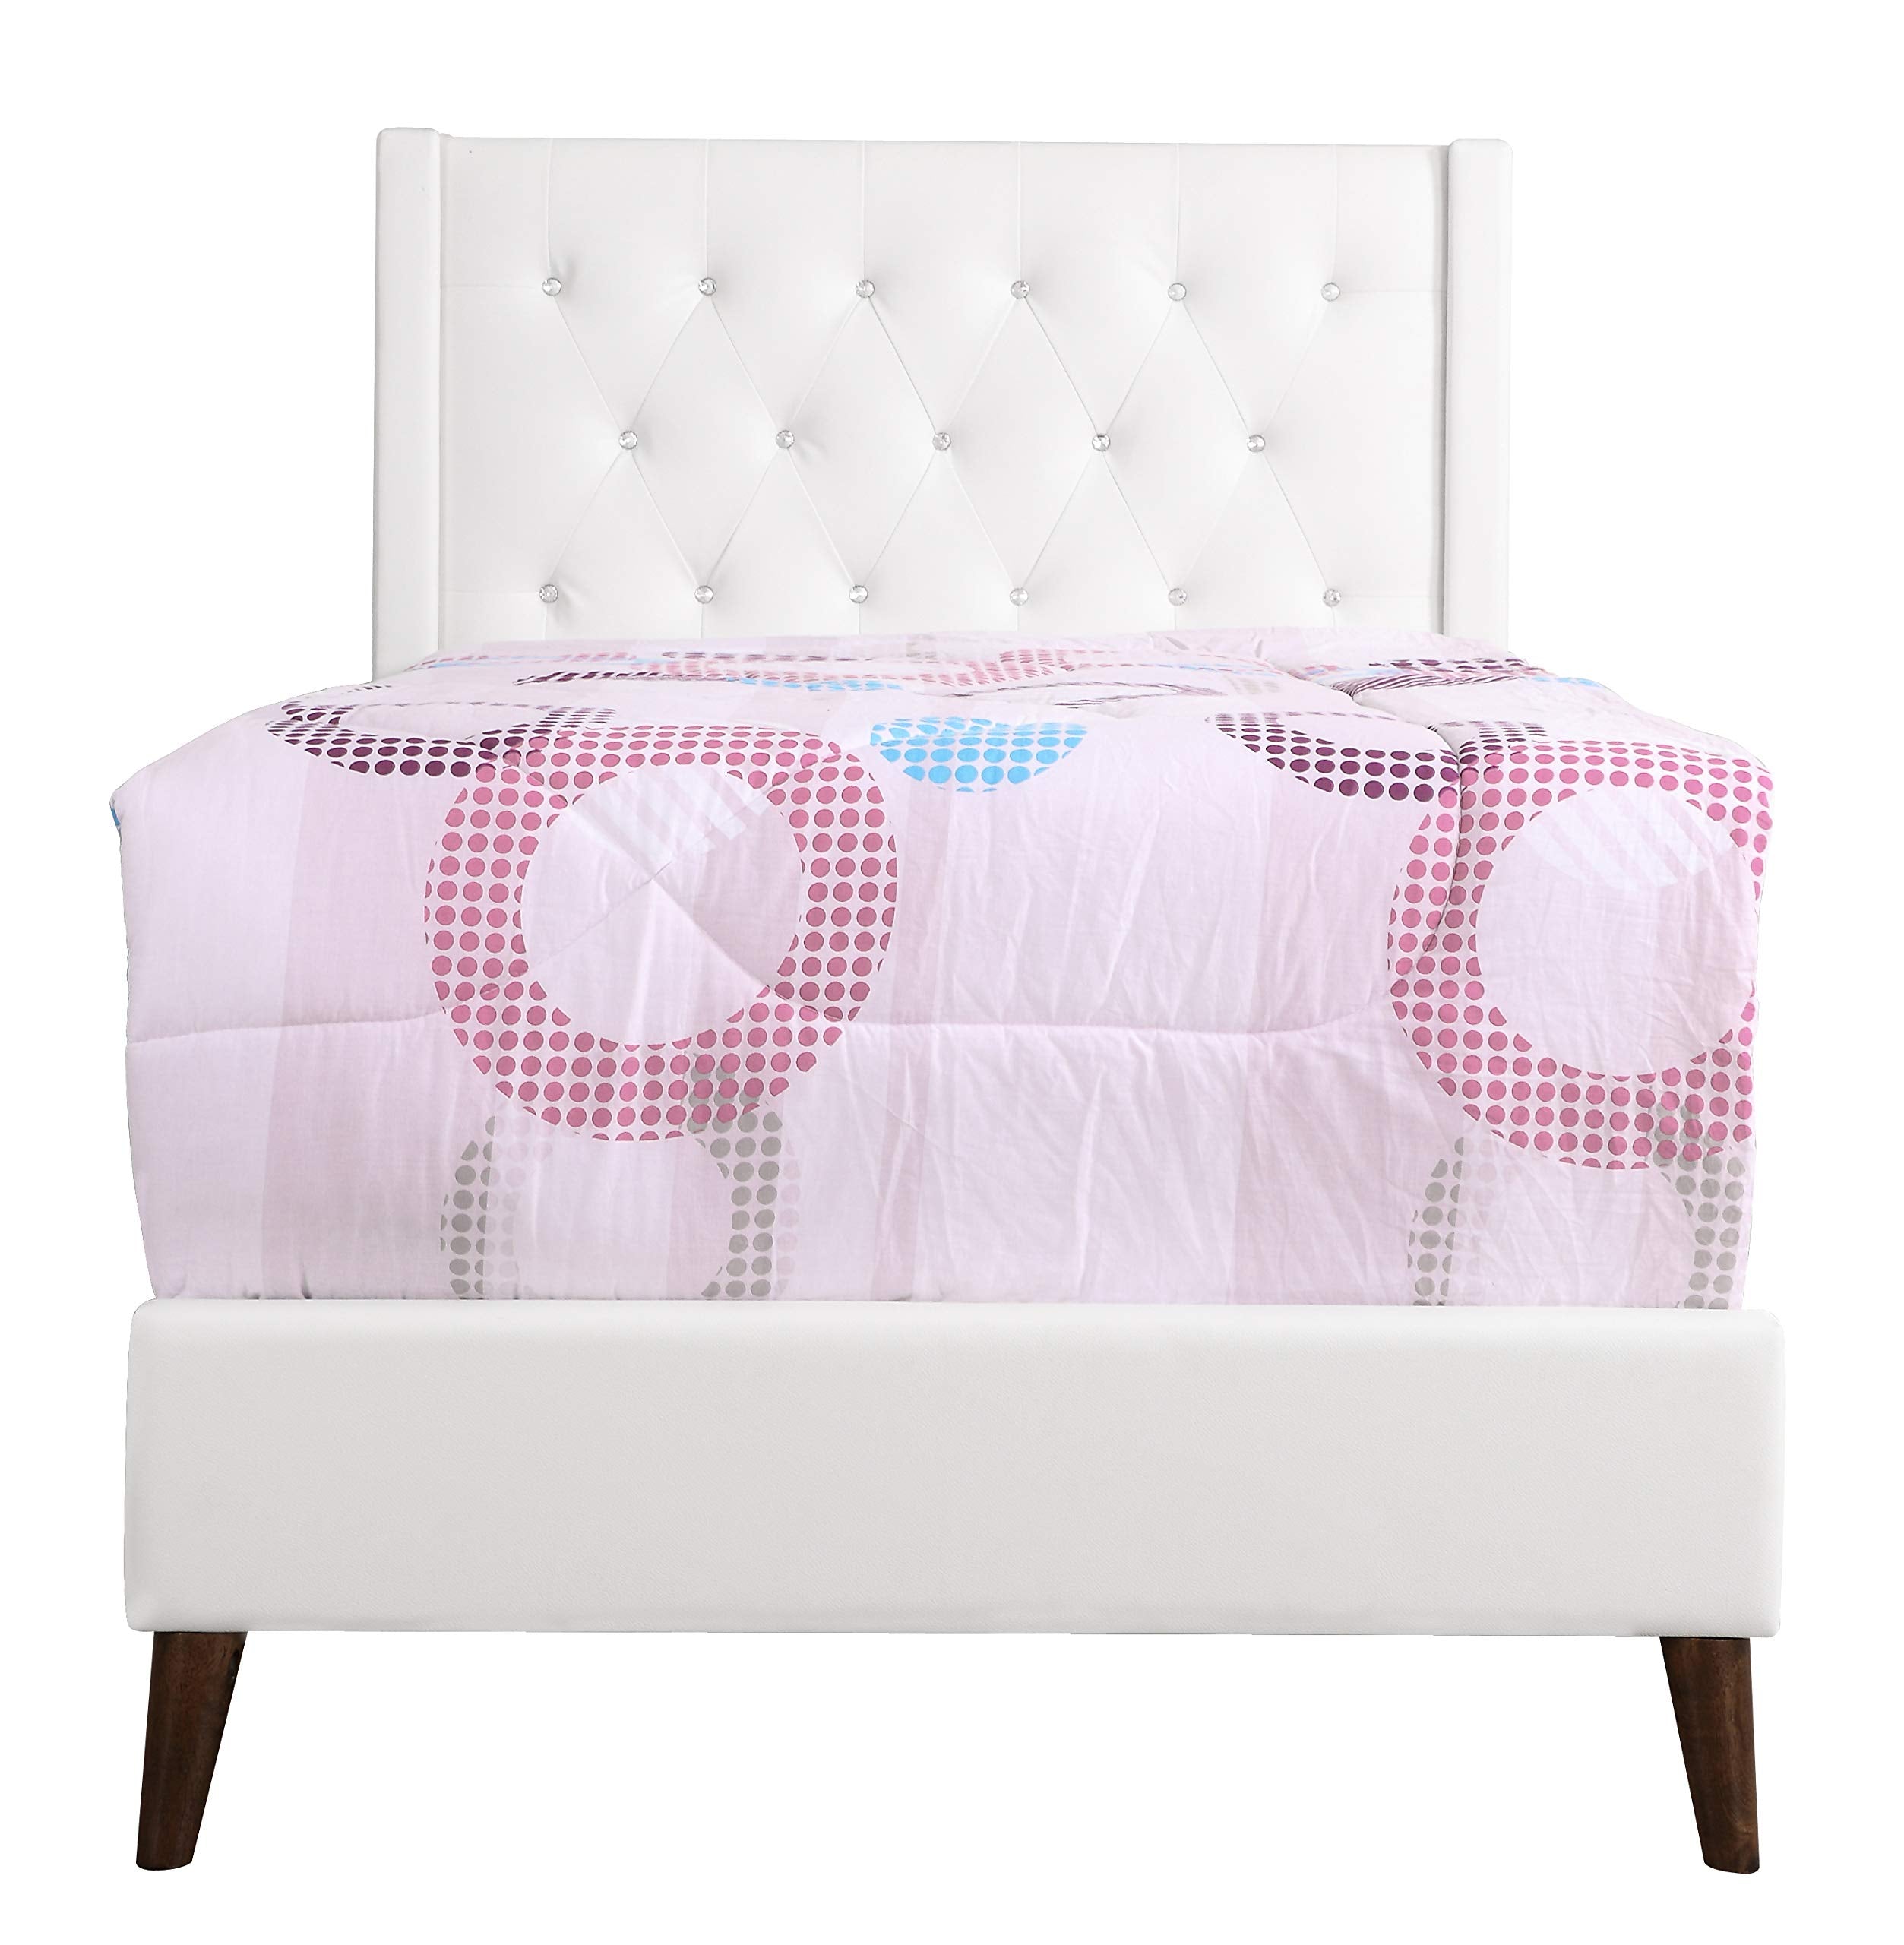 Glory Furniture Bergen Twin, White Upholstered bed,